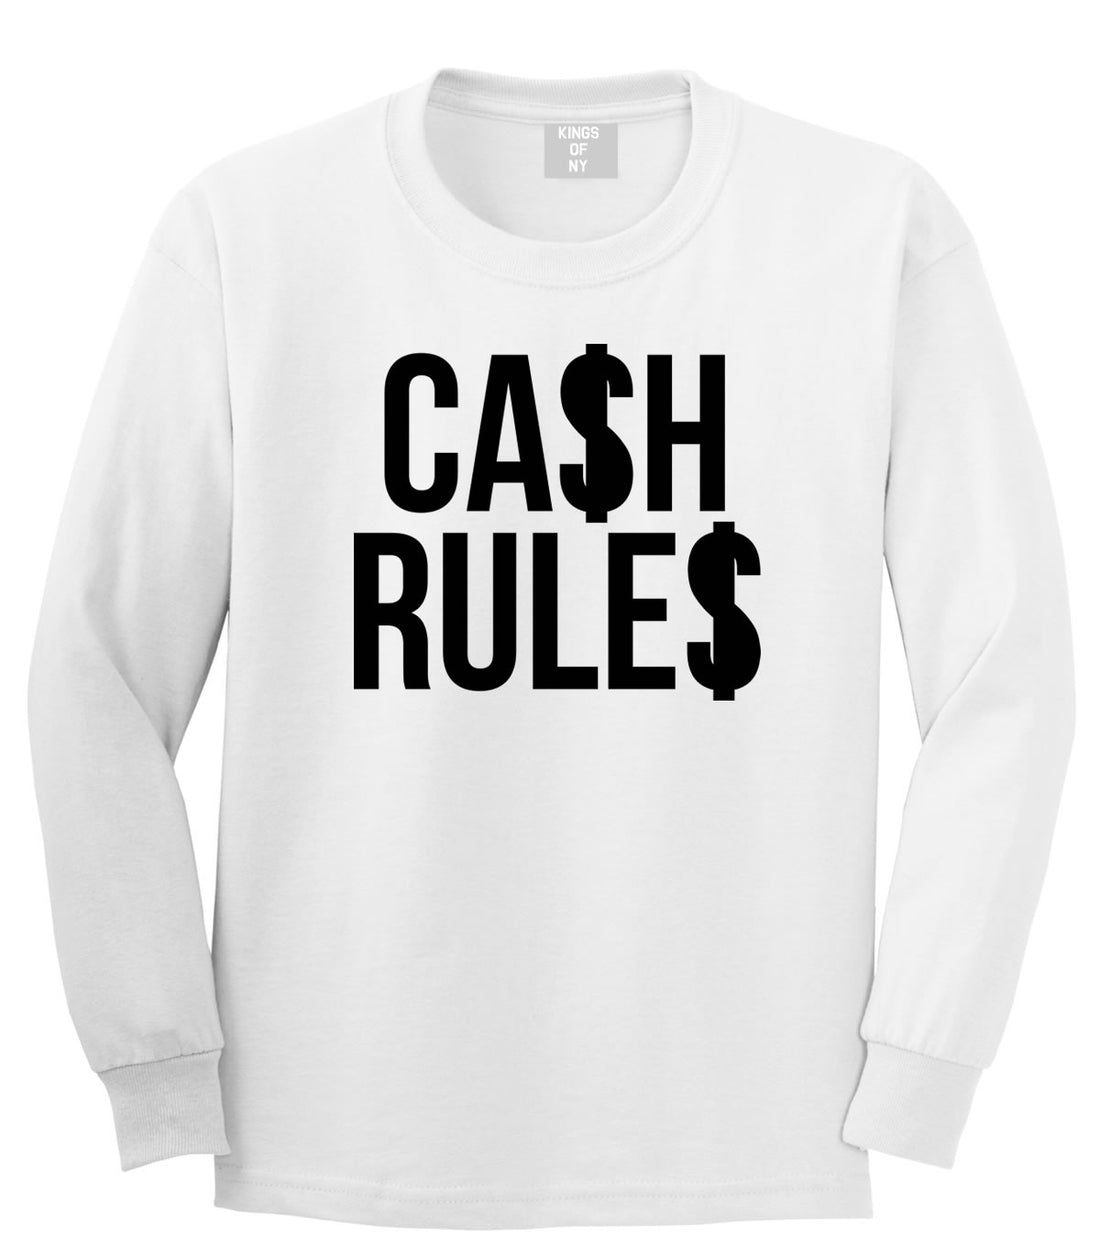 Cash Rules Long Sleeve T-Shirt in White by Kings Of NY